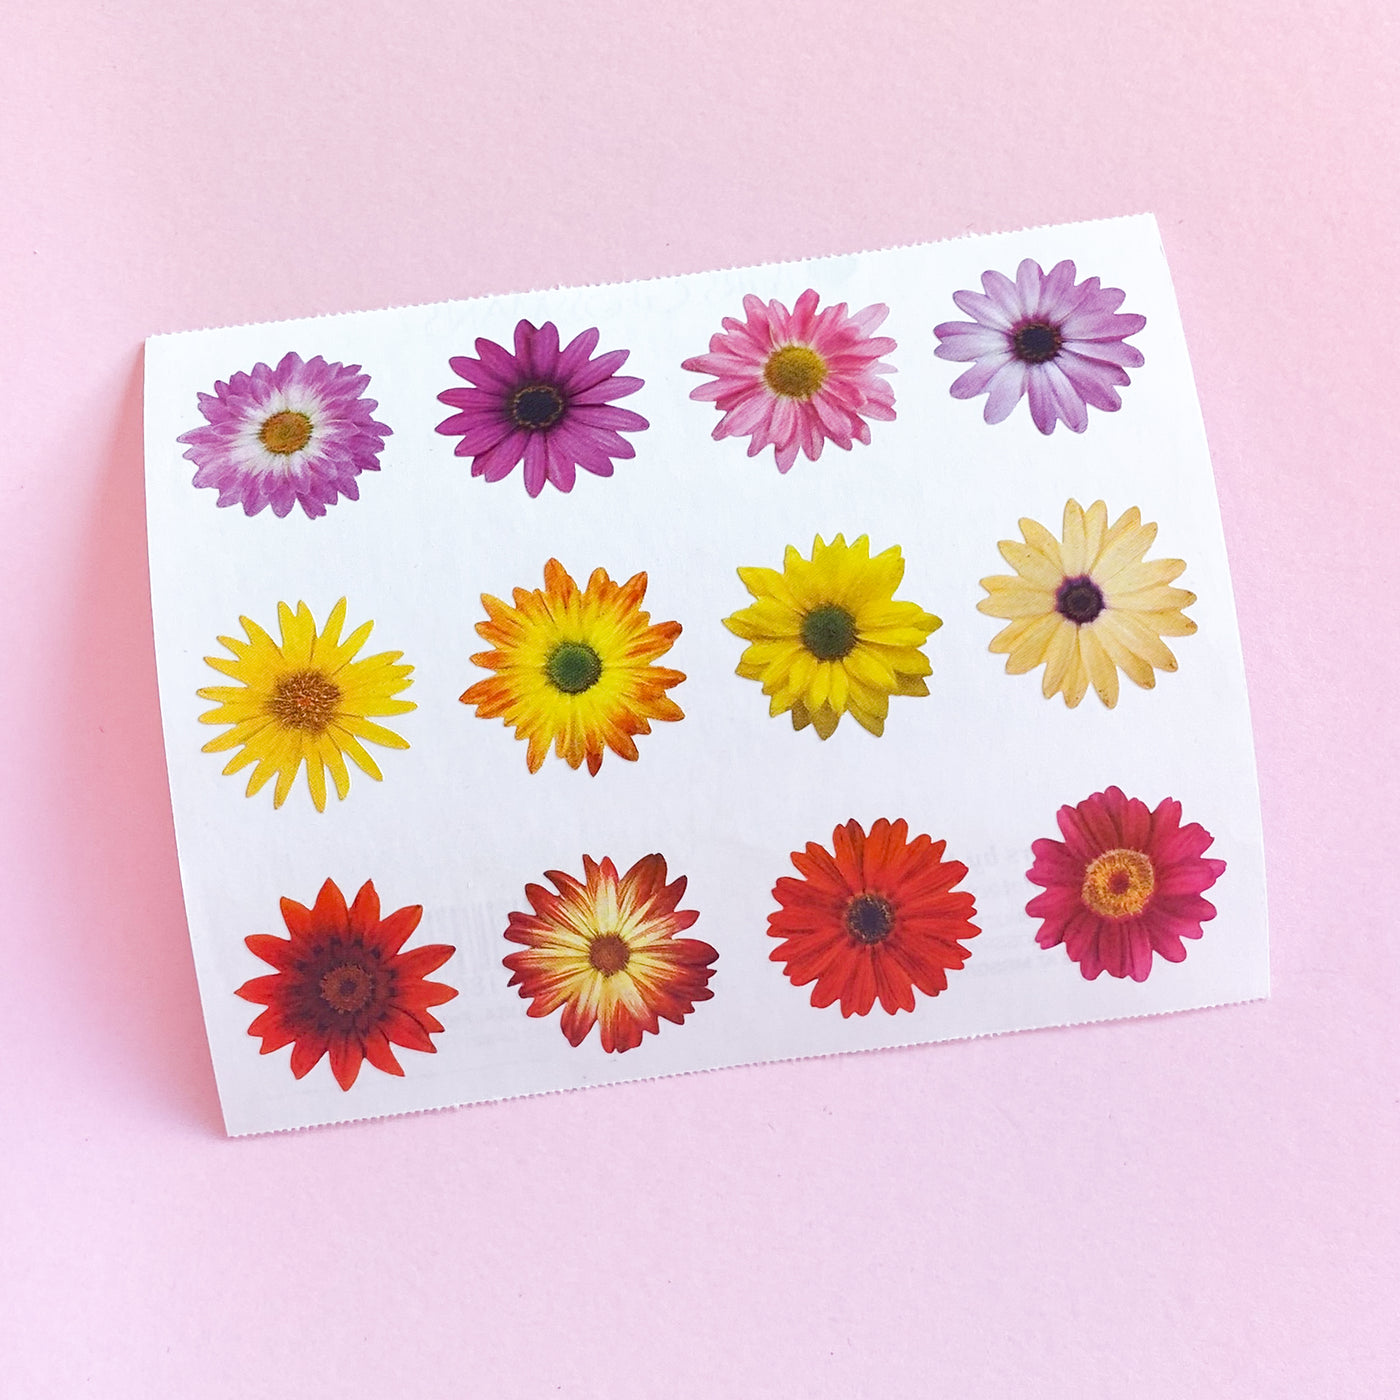 Flowers by the Dozen Stickers on the Roll by Mrs. Grossman’s